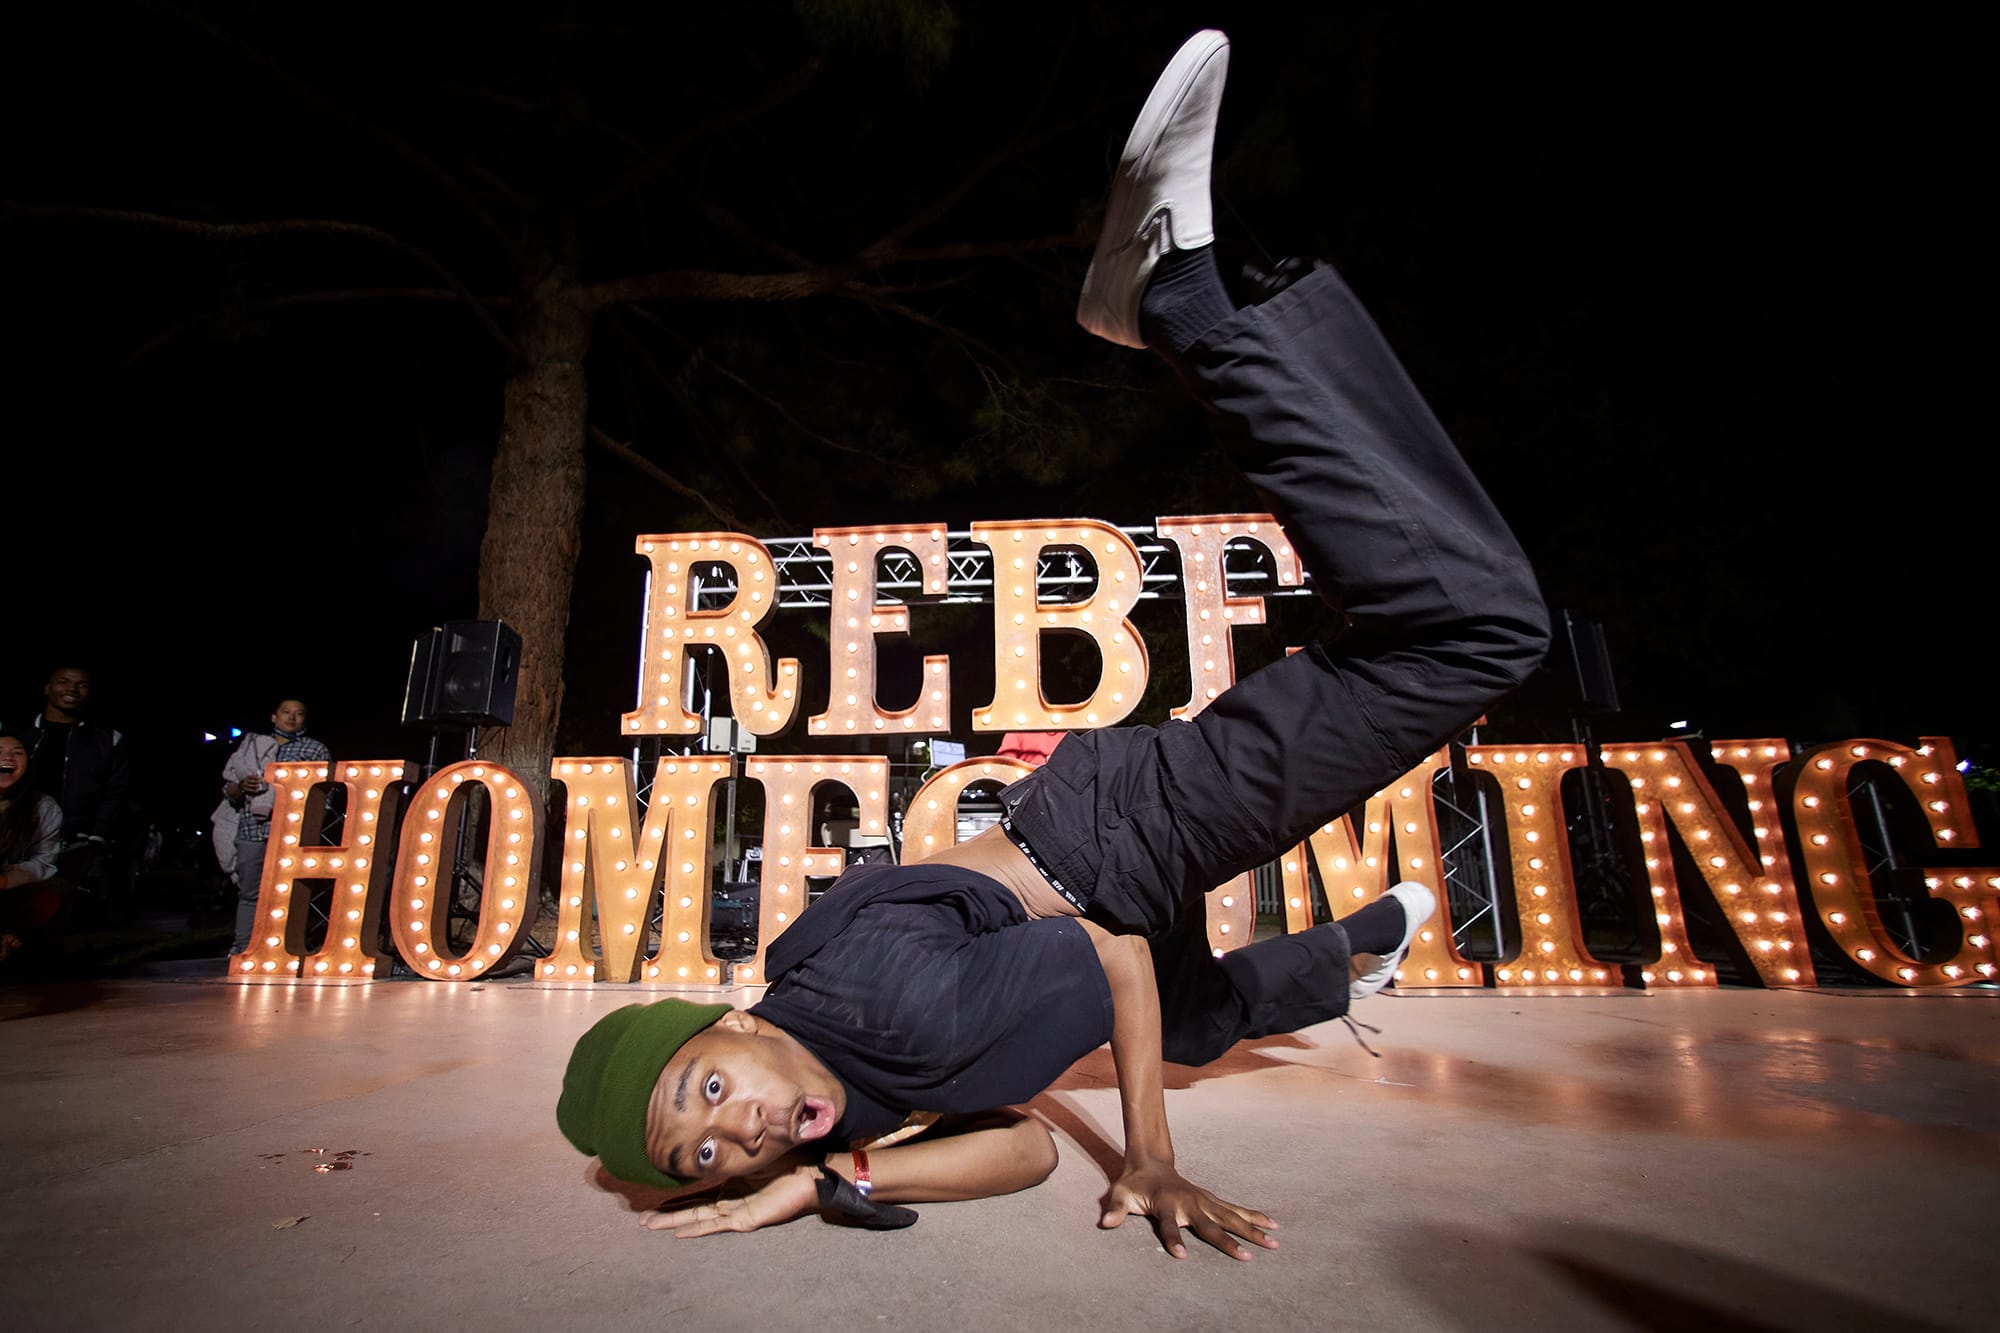 Student breakdancing in front of Rebel Homecoming sign